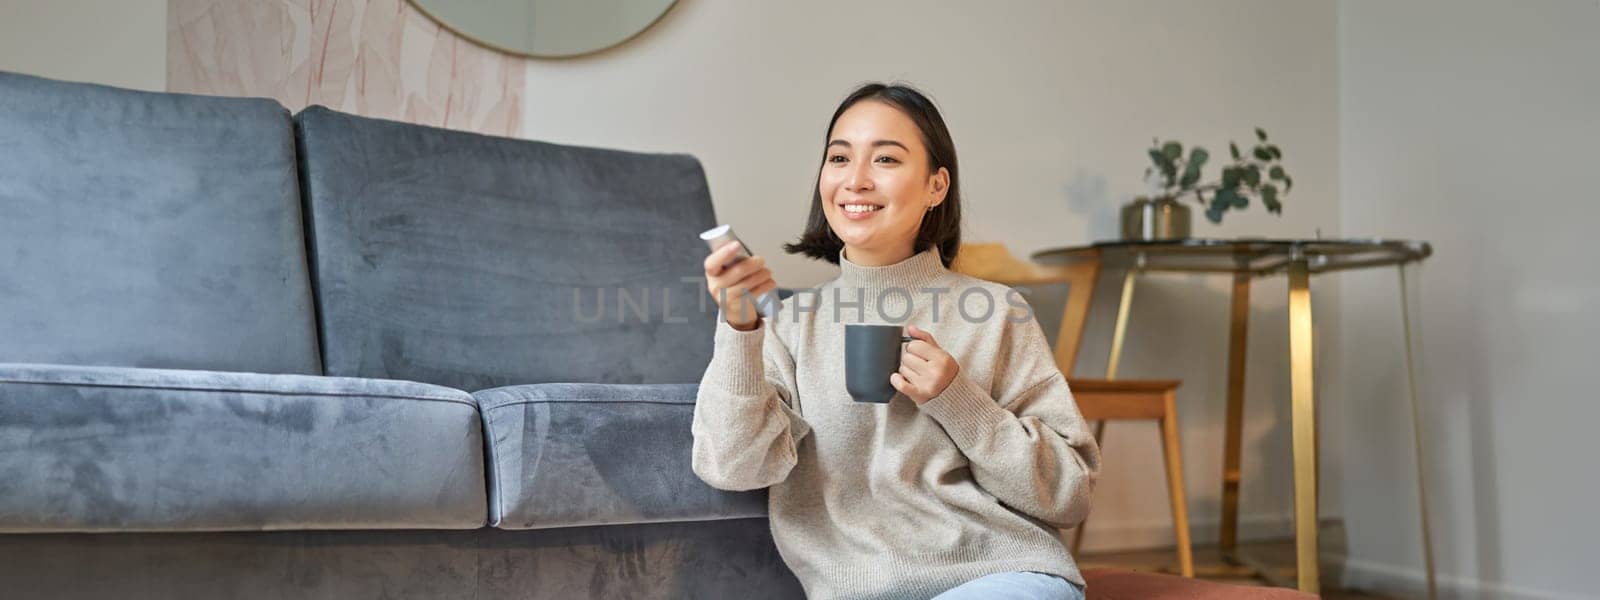 Portrait of smiling korean woman sitting near tv, holding remote and switching channels while drinking hot coffee.